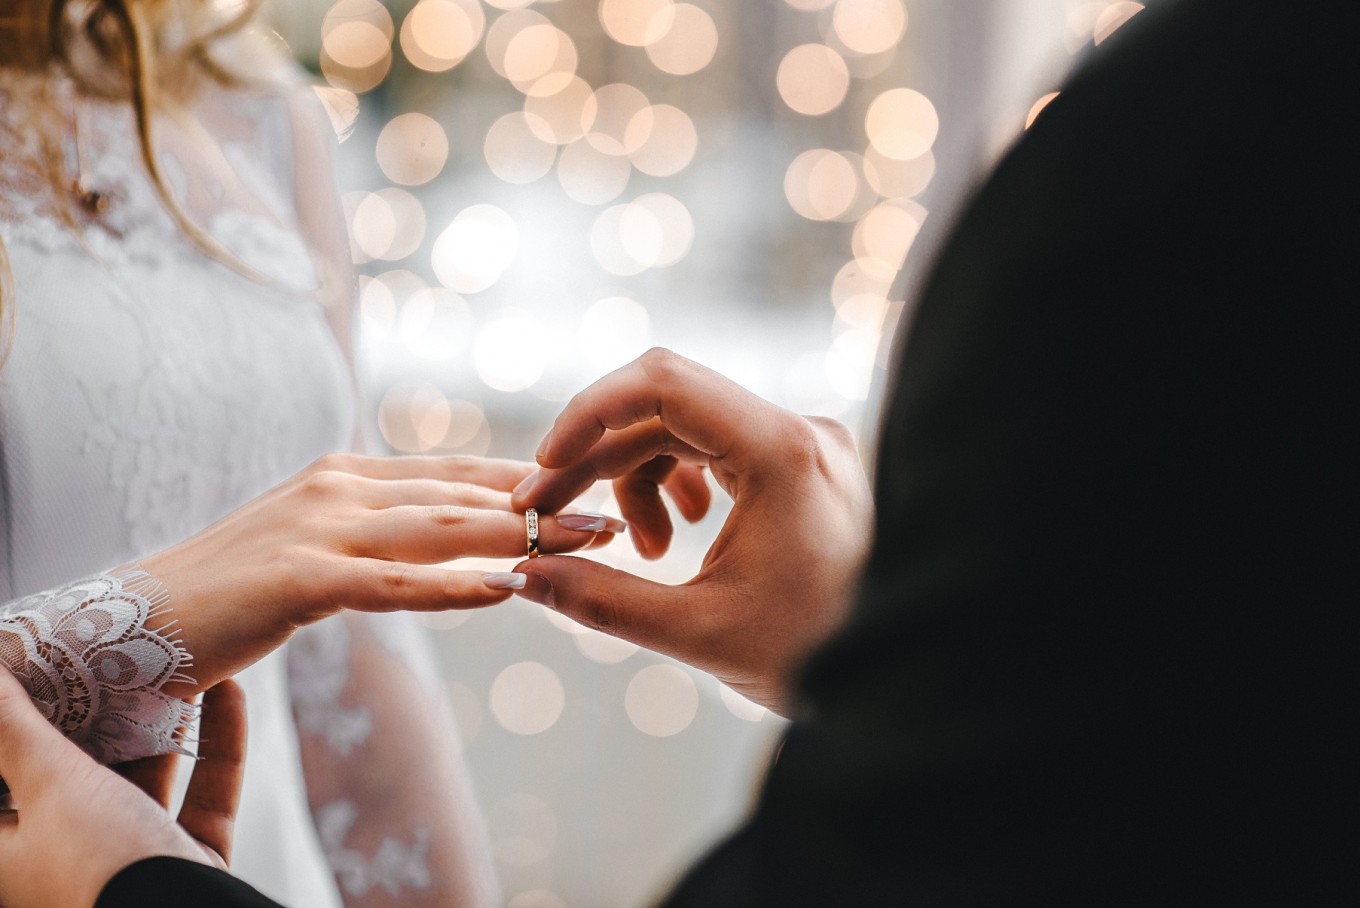 Planning to get married? Indonesia considers mandatory premarital class for couples in 2020